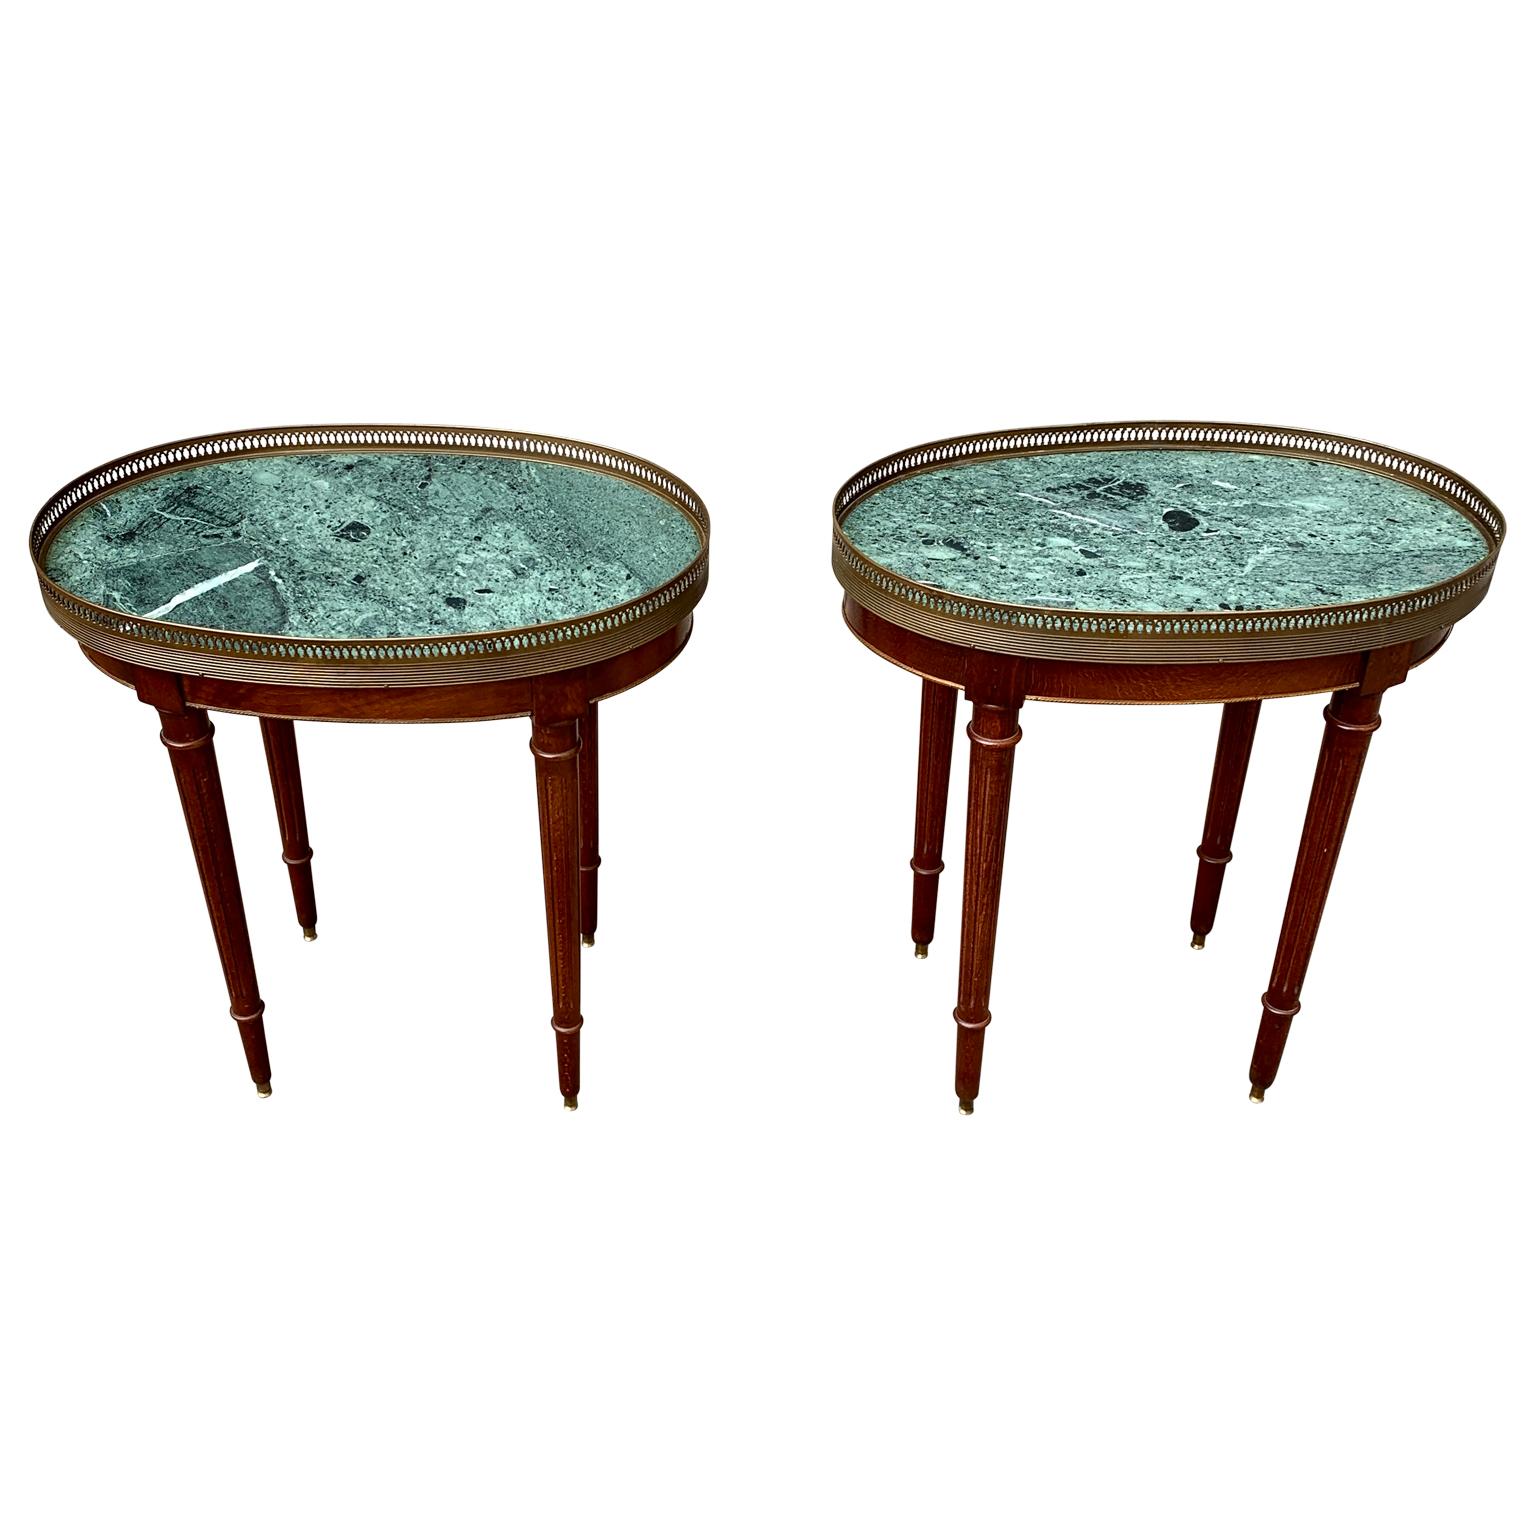 A charming pair of 20th Century Swedish nightstands or night tables in mahogany wood with green serpentine marble tops. These Gustavian brass gallery oval tables with fluted Louis XVI style legs, would be a wonderful addition in a living room